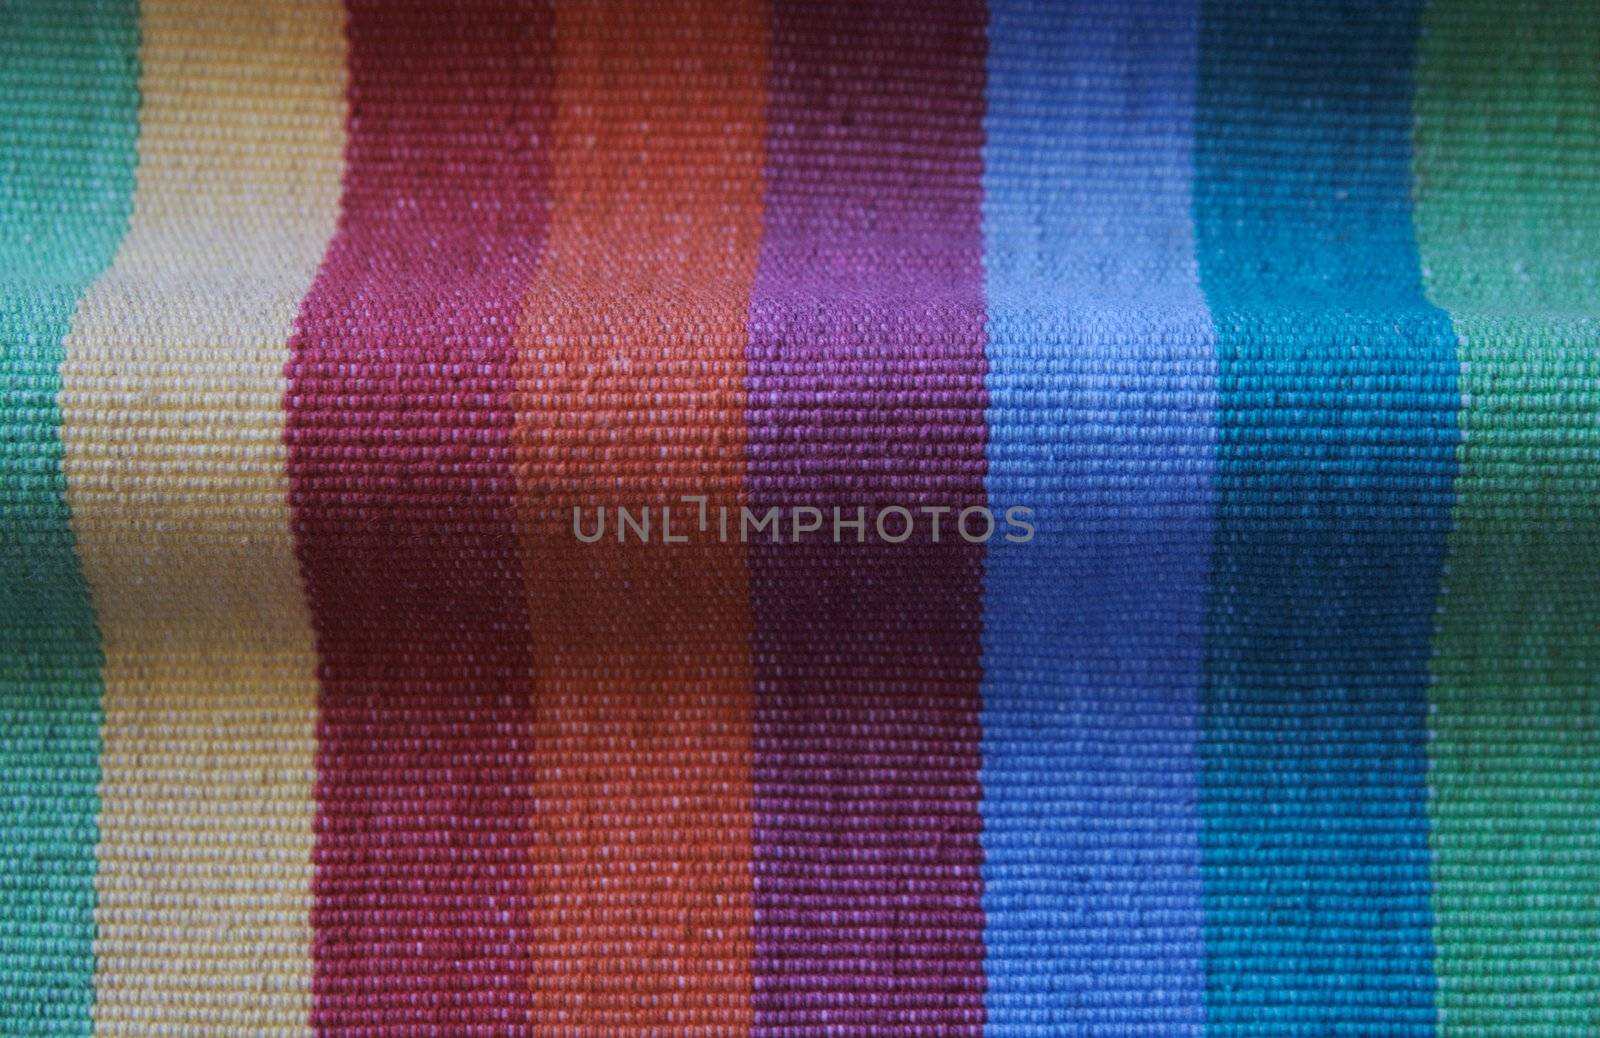 curving fabric in bright, cheerful multicolored shades